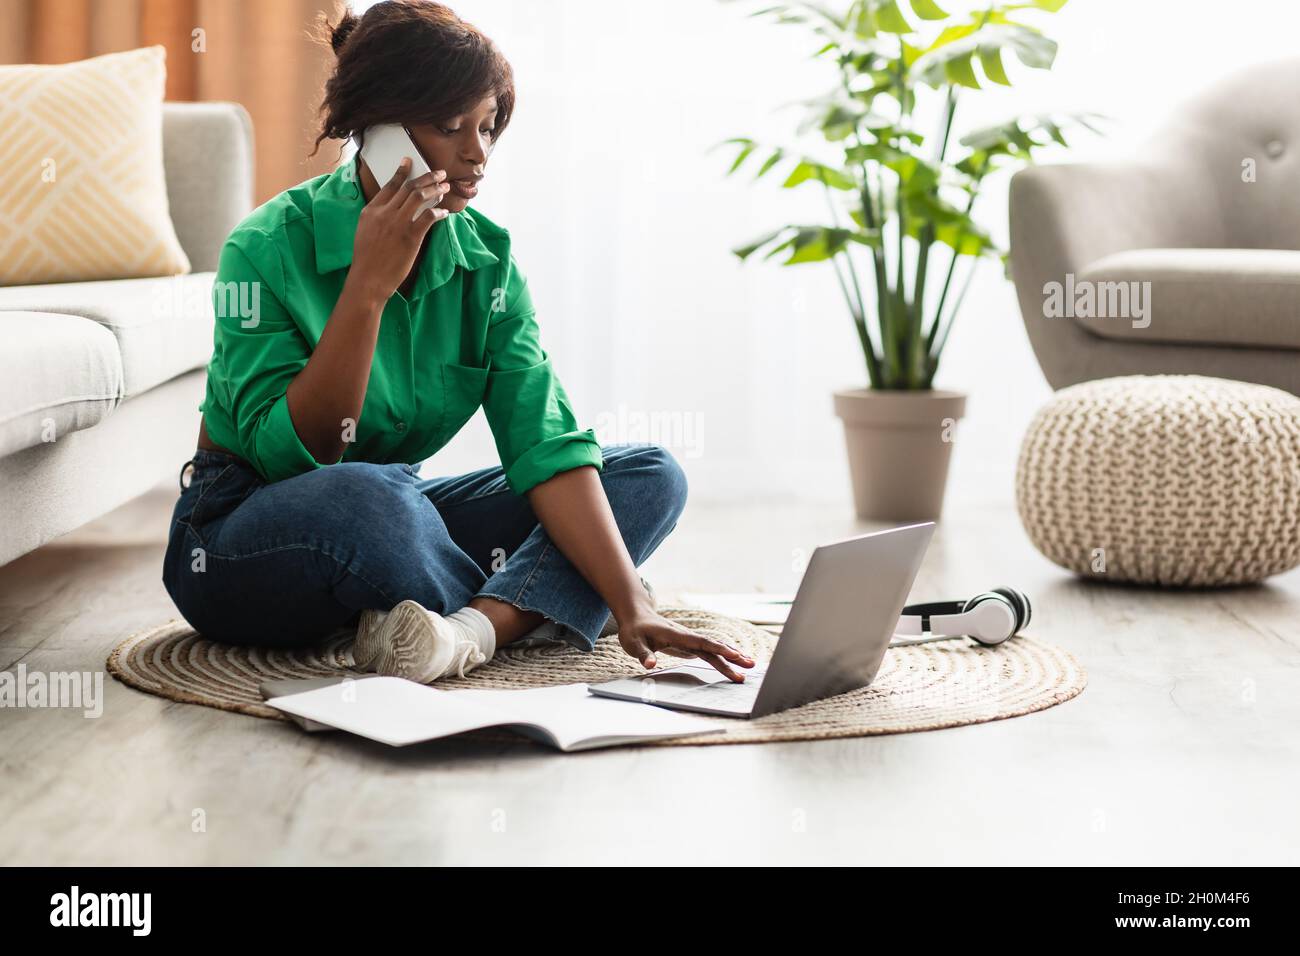 African American Woman Talking On Phone Using Laptop At Home Stock Photo